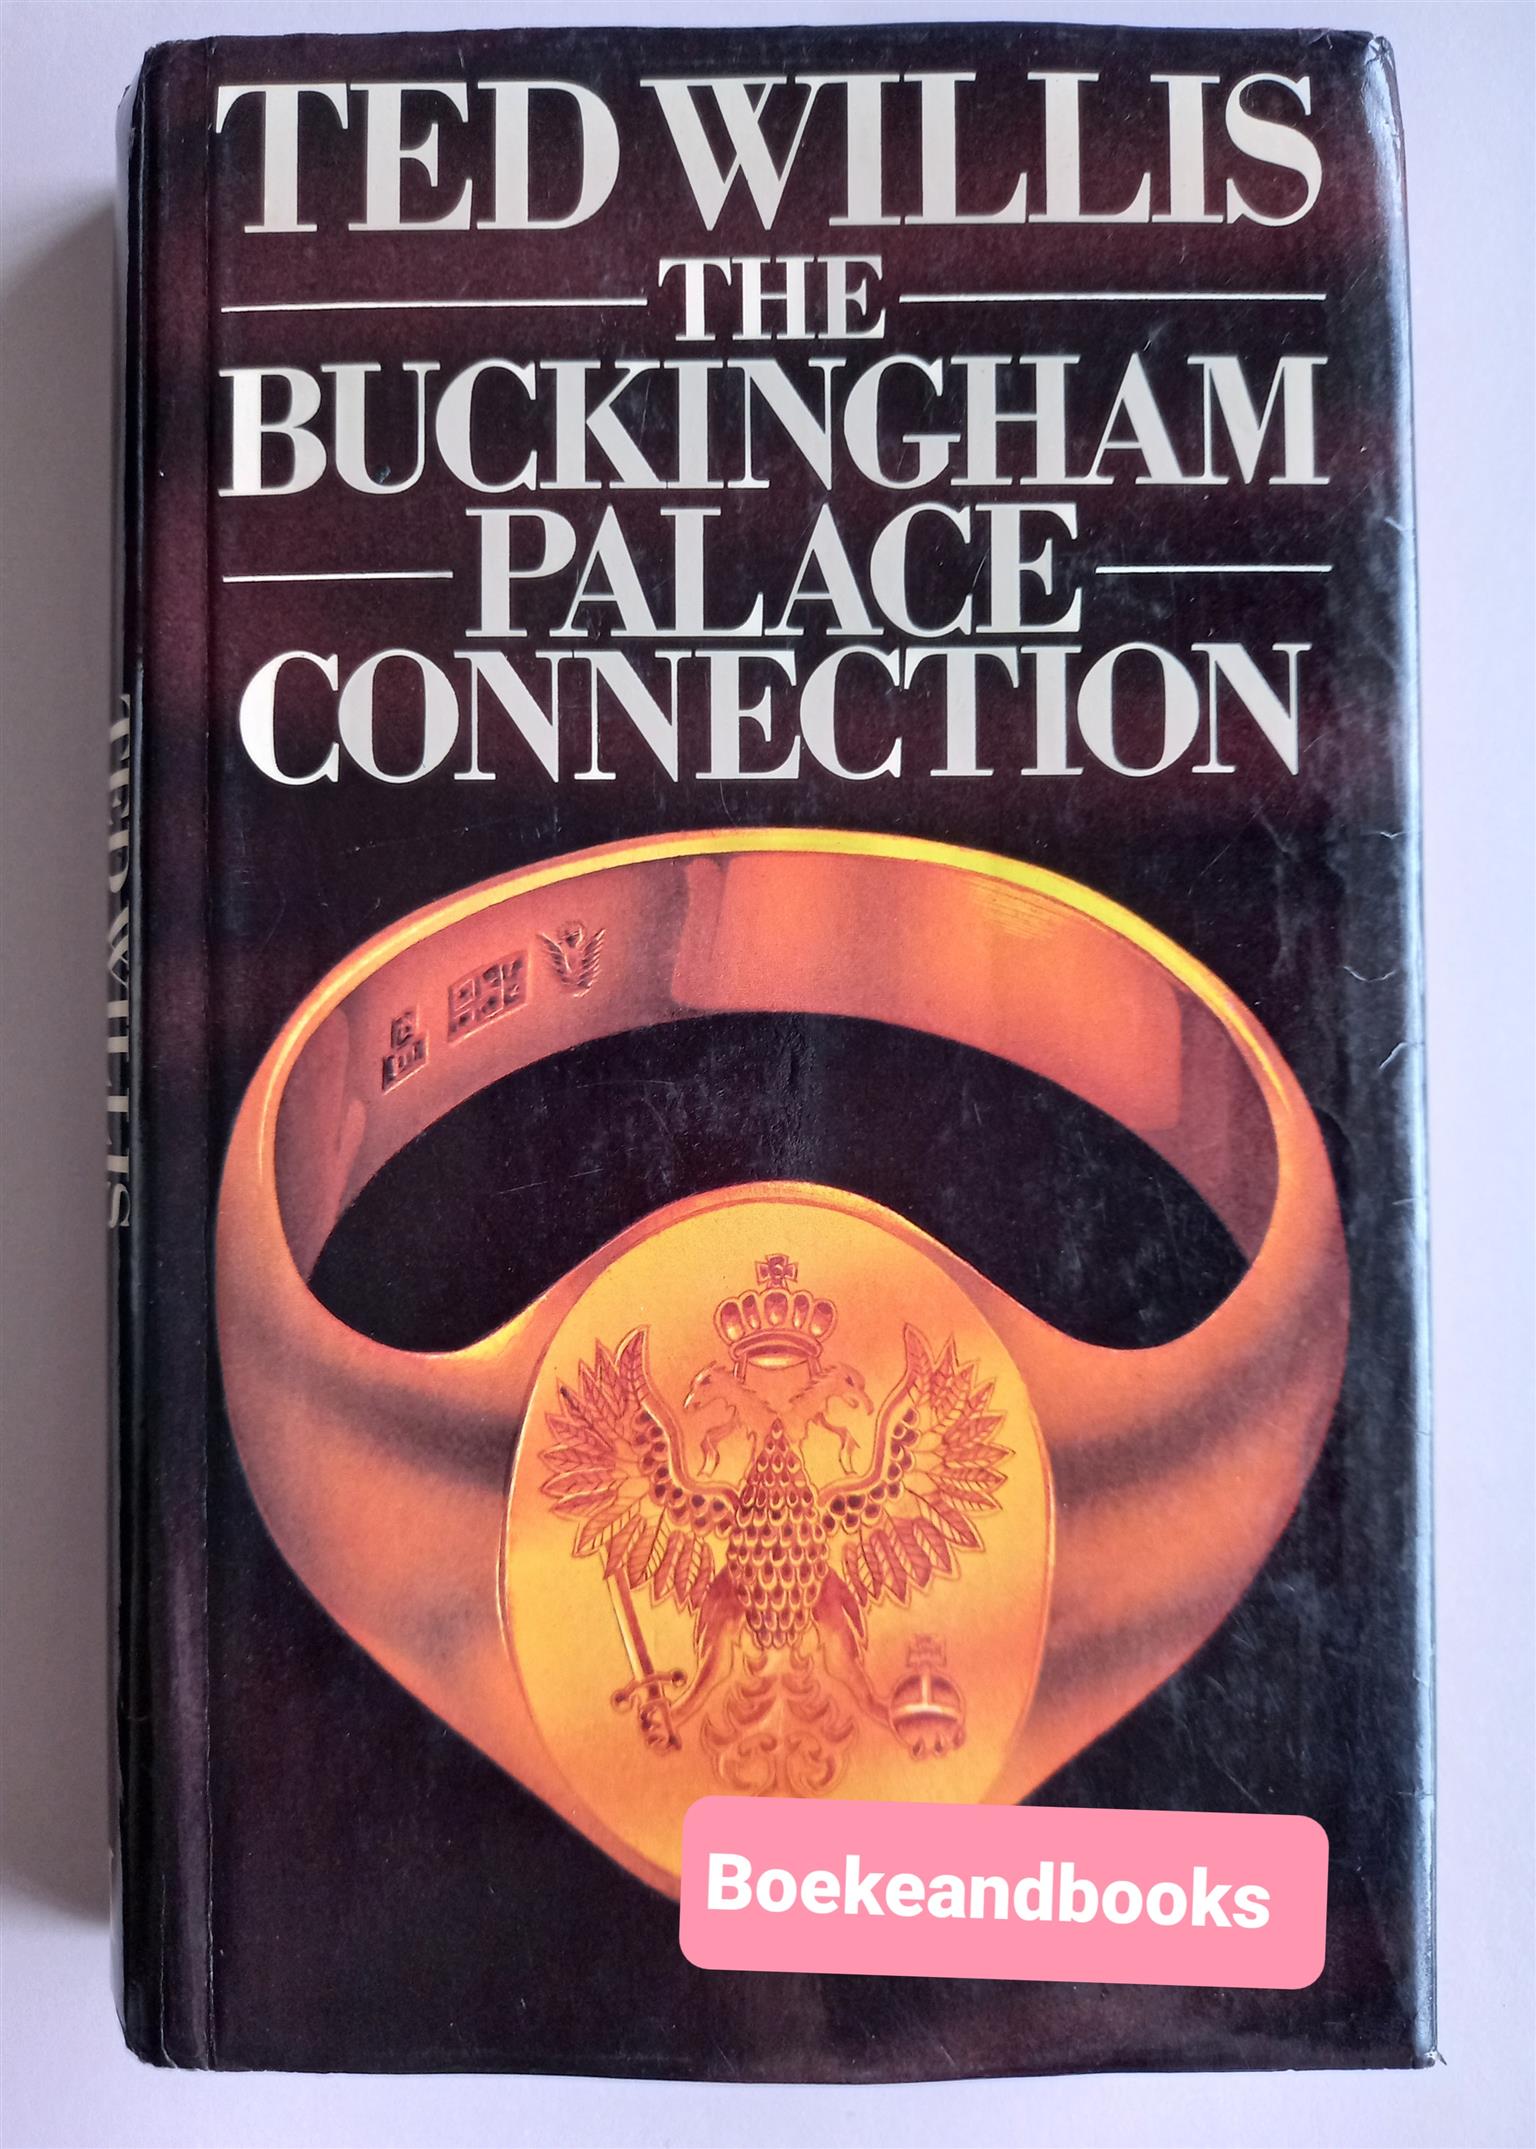 The Buckingham Palace Connection - Ted Willis.  